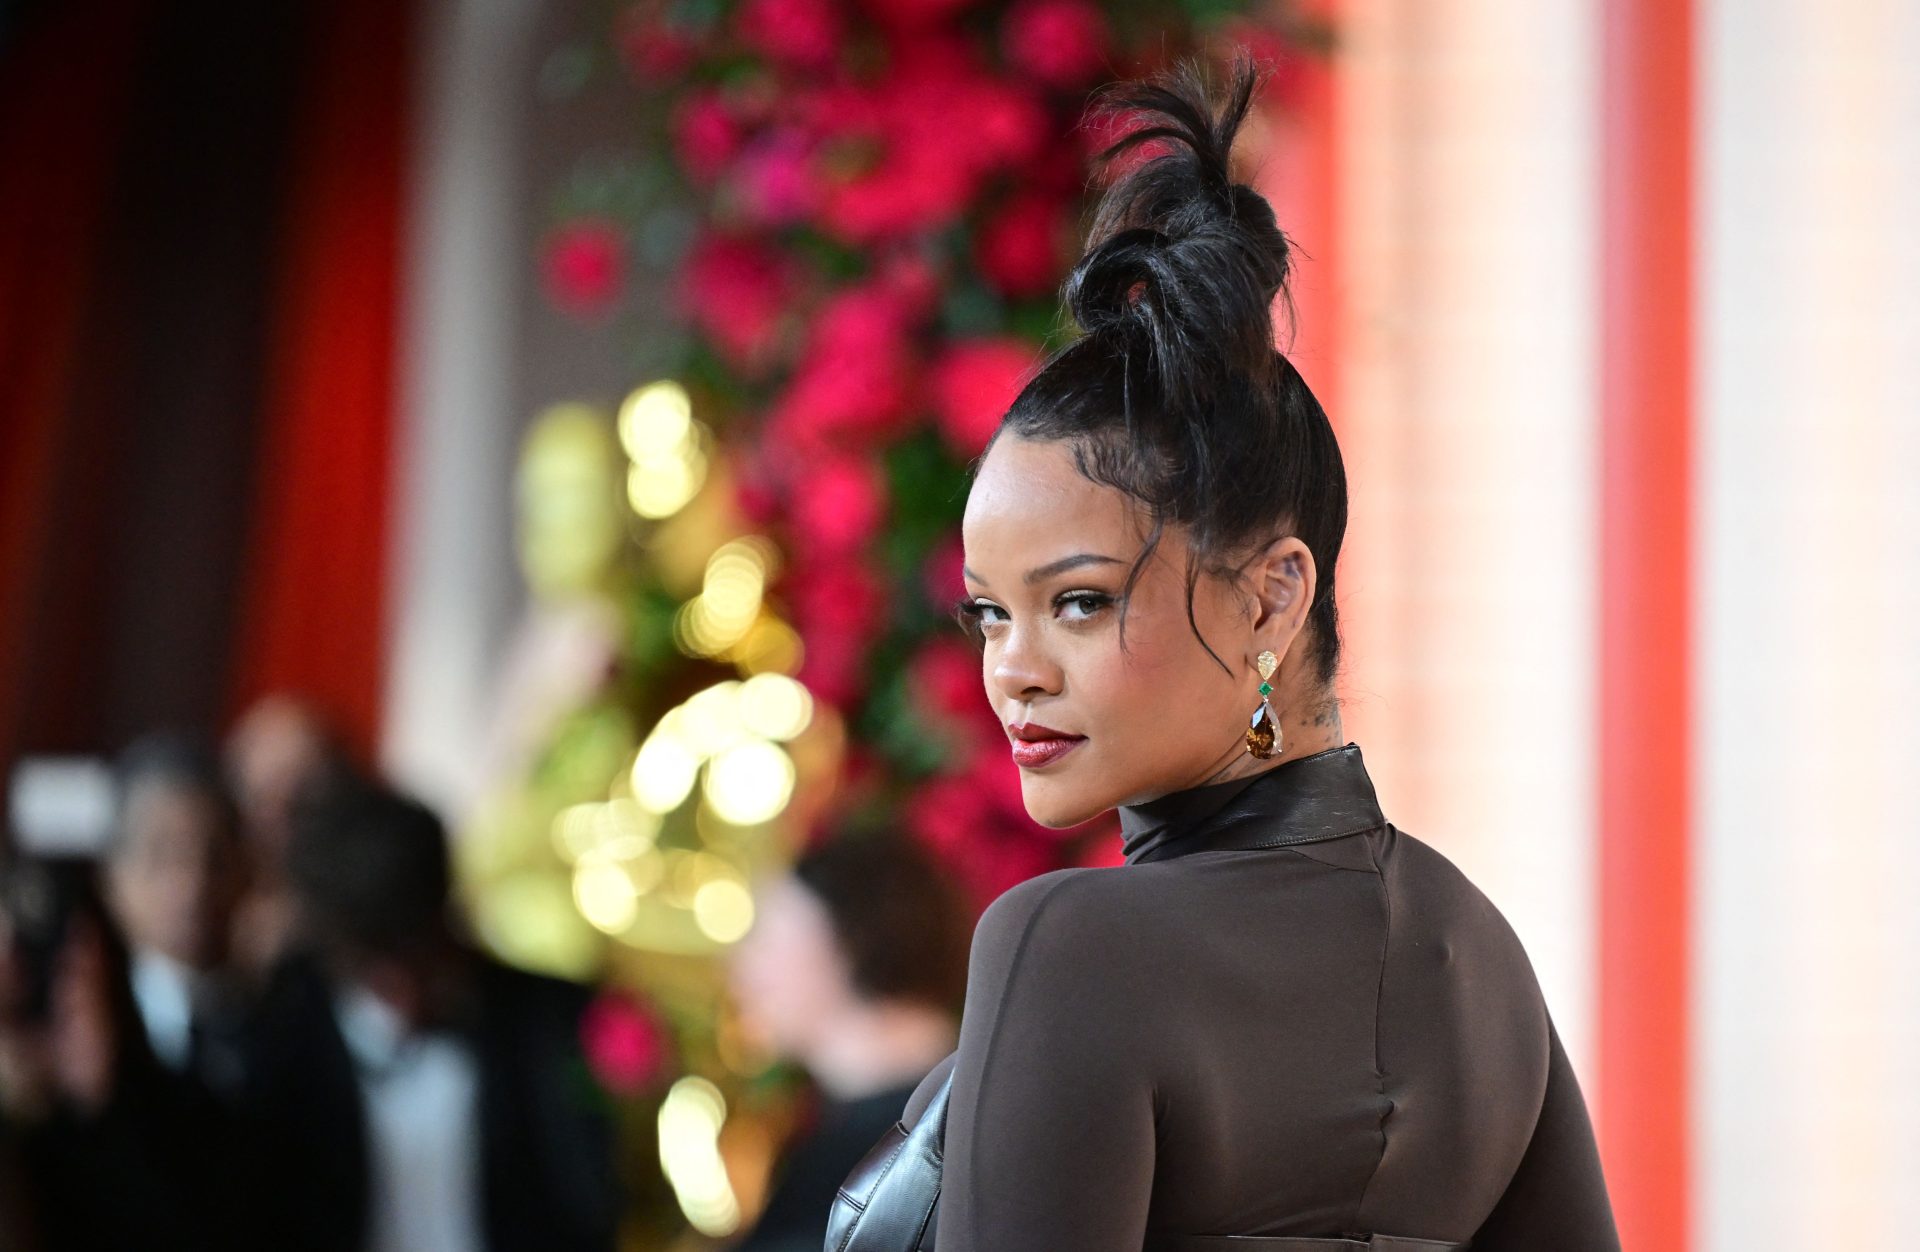 Rihanna Shares Sultry Maternity Photos From First Pregnancy